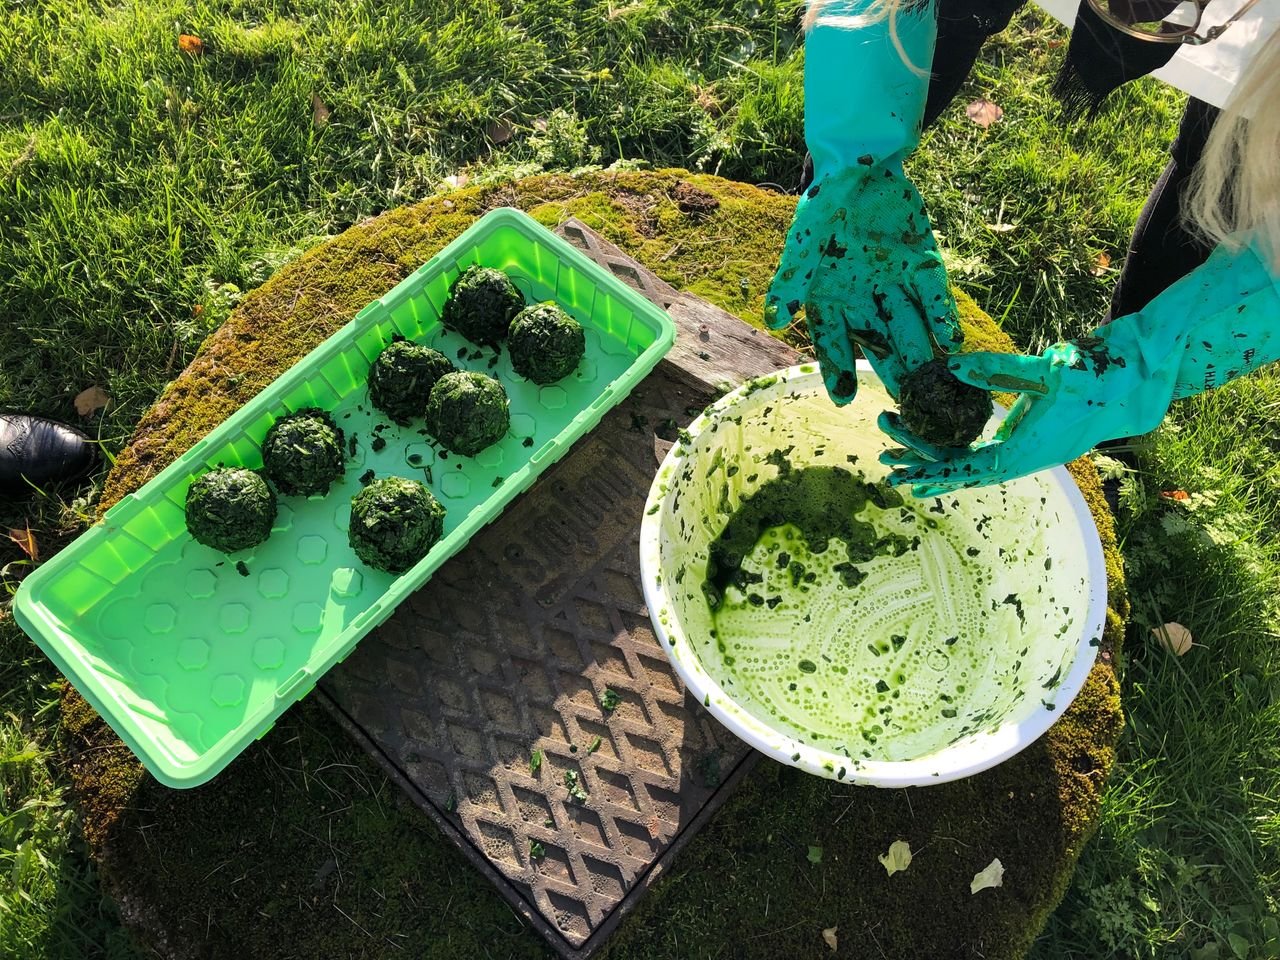 Making woad balls for dyeing. Photo: Refashioning the Renaissance project, 2019.